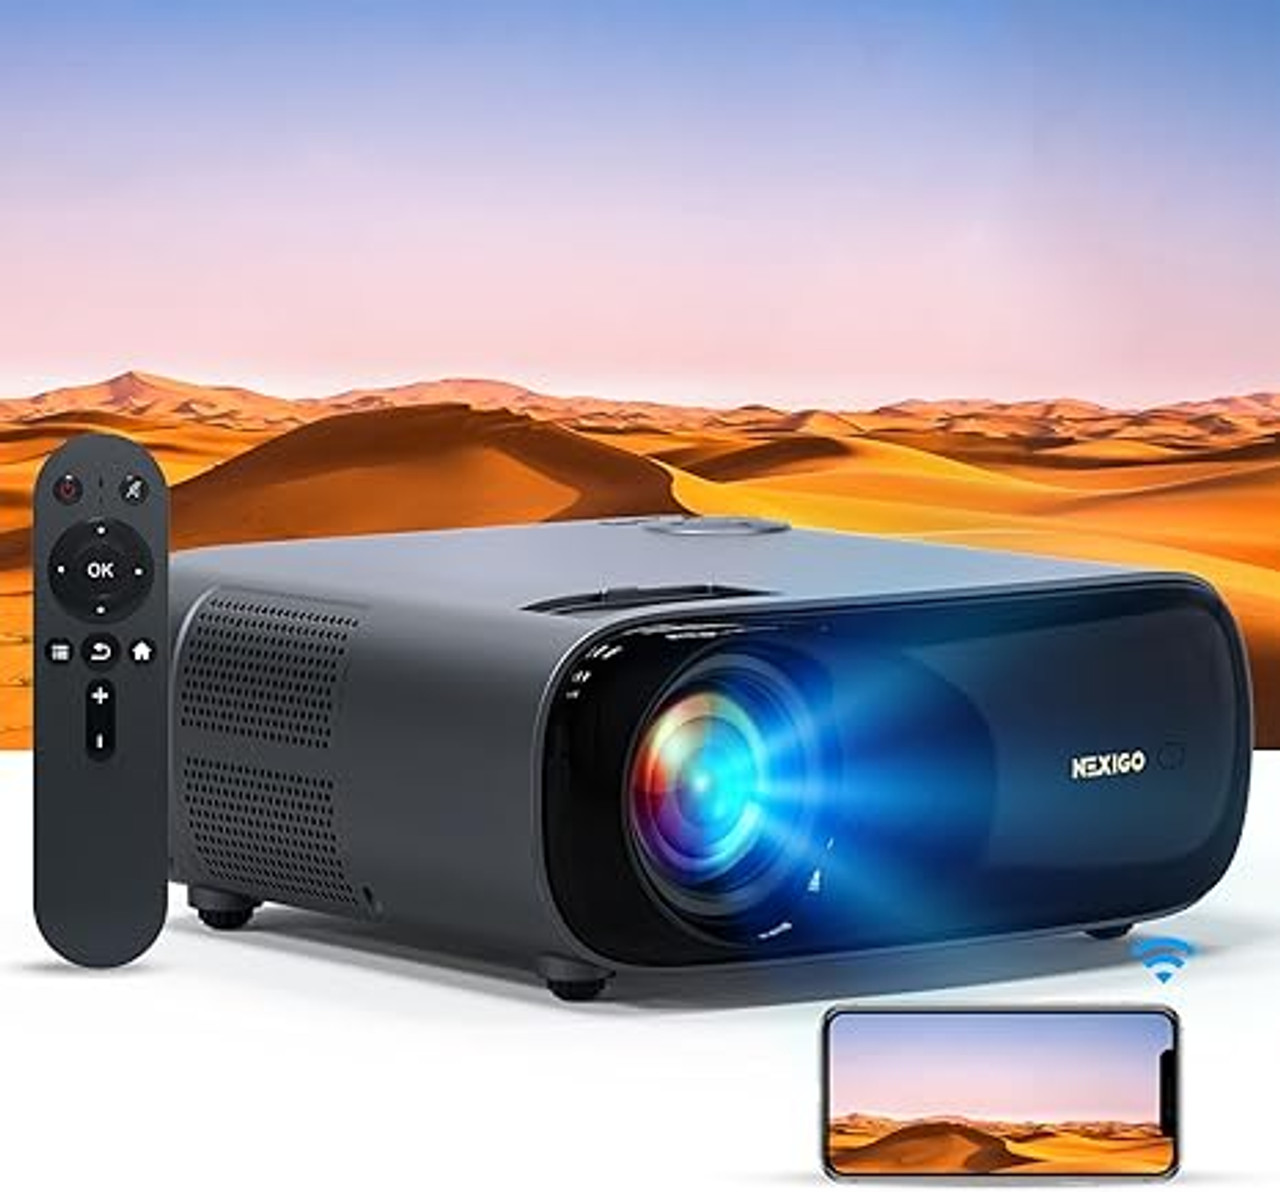  XGIMI HORIZON Ultra 4K Projector - 100 + Dolby Vision, Dual  Light, ISA 3.0, 2300 ISO Lumens, Android TV 11, 2x12w Harman Kardon,  Optical Zoom - Home Theater Projector with WiFi and Bluetooth… : Electronics